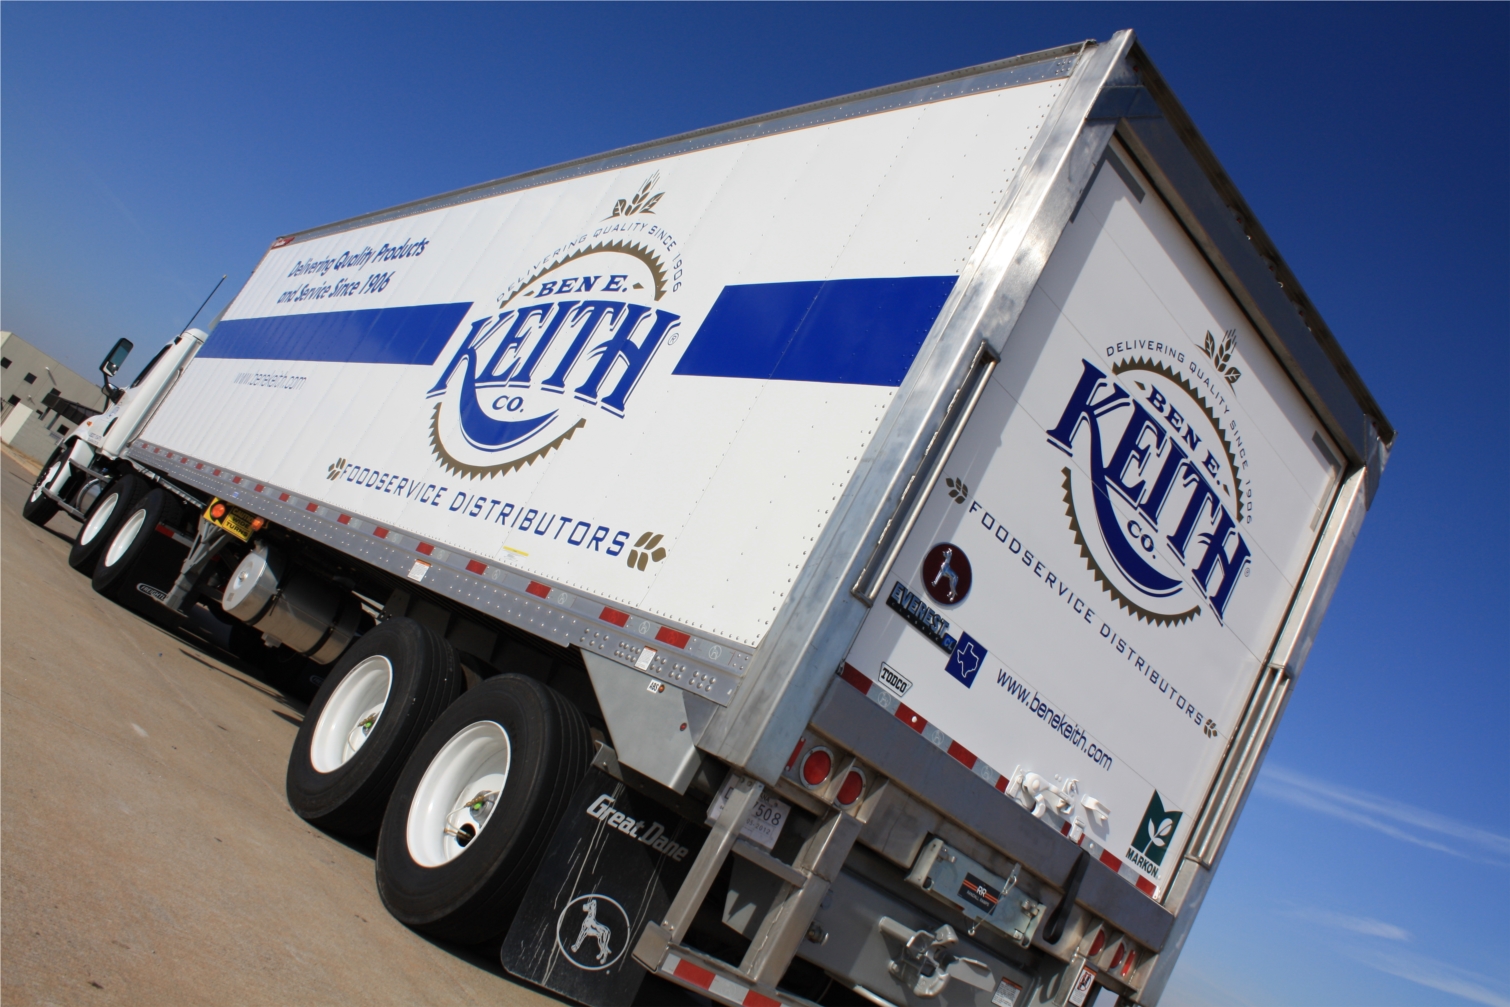 Ben E. Keith, a driving force in foodservice.